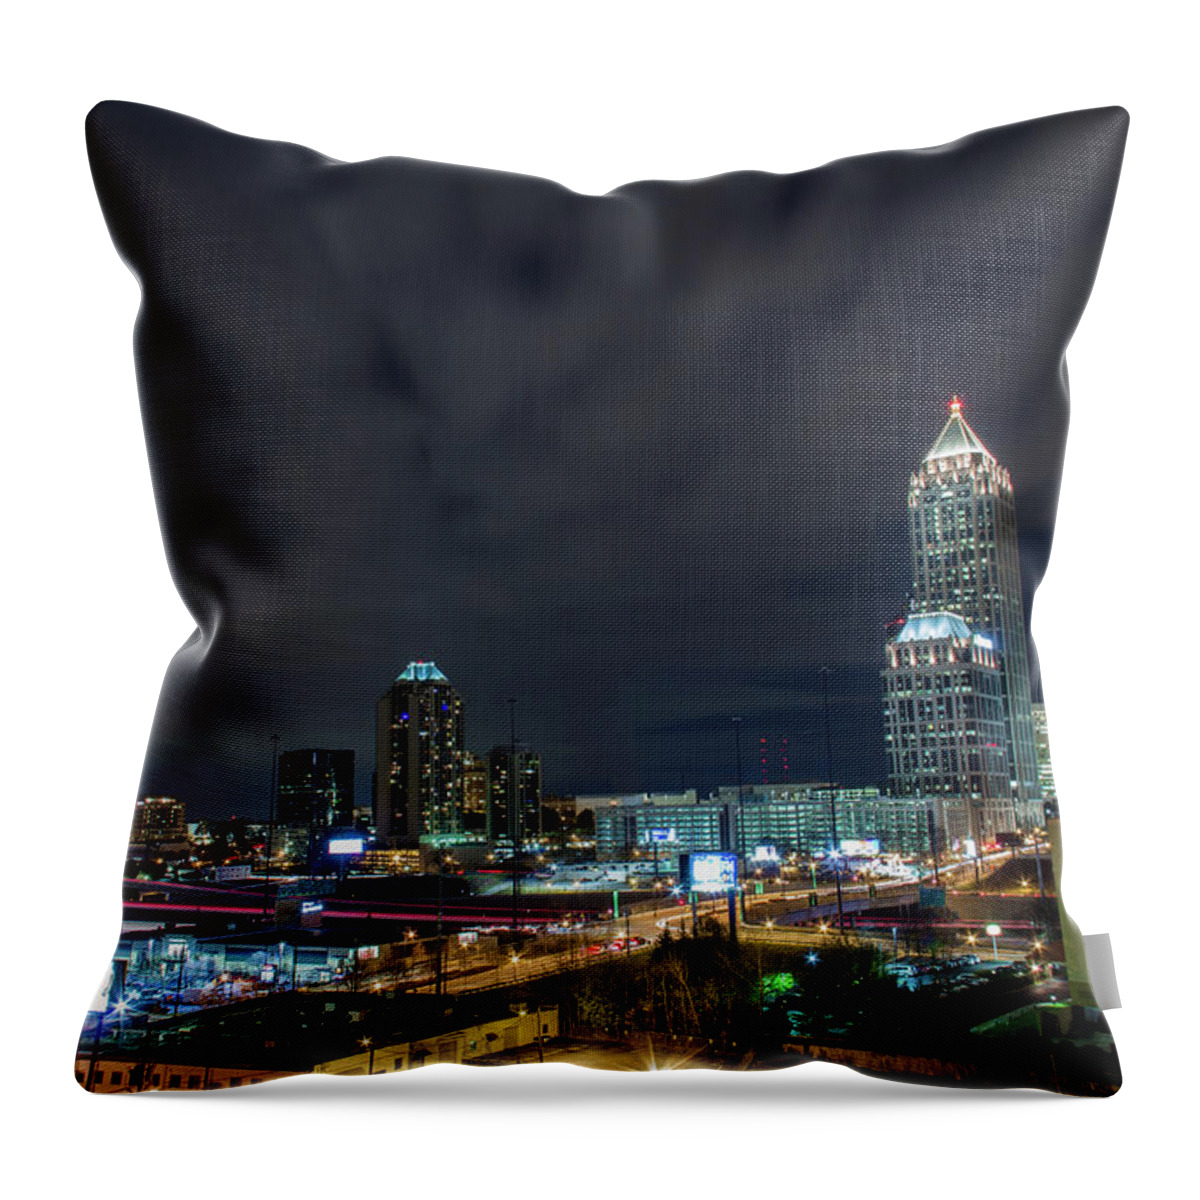 City Throw Pillow featuring the photograph Cloudy City by Kenny Thomas